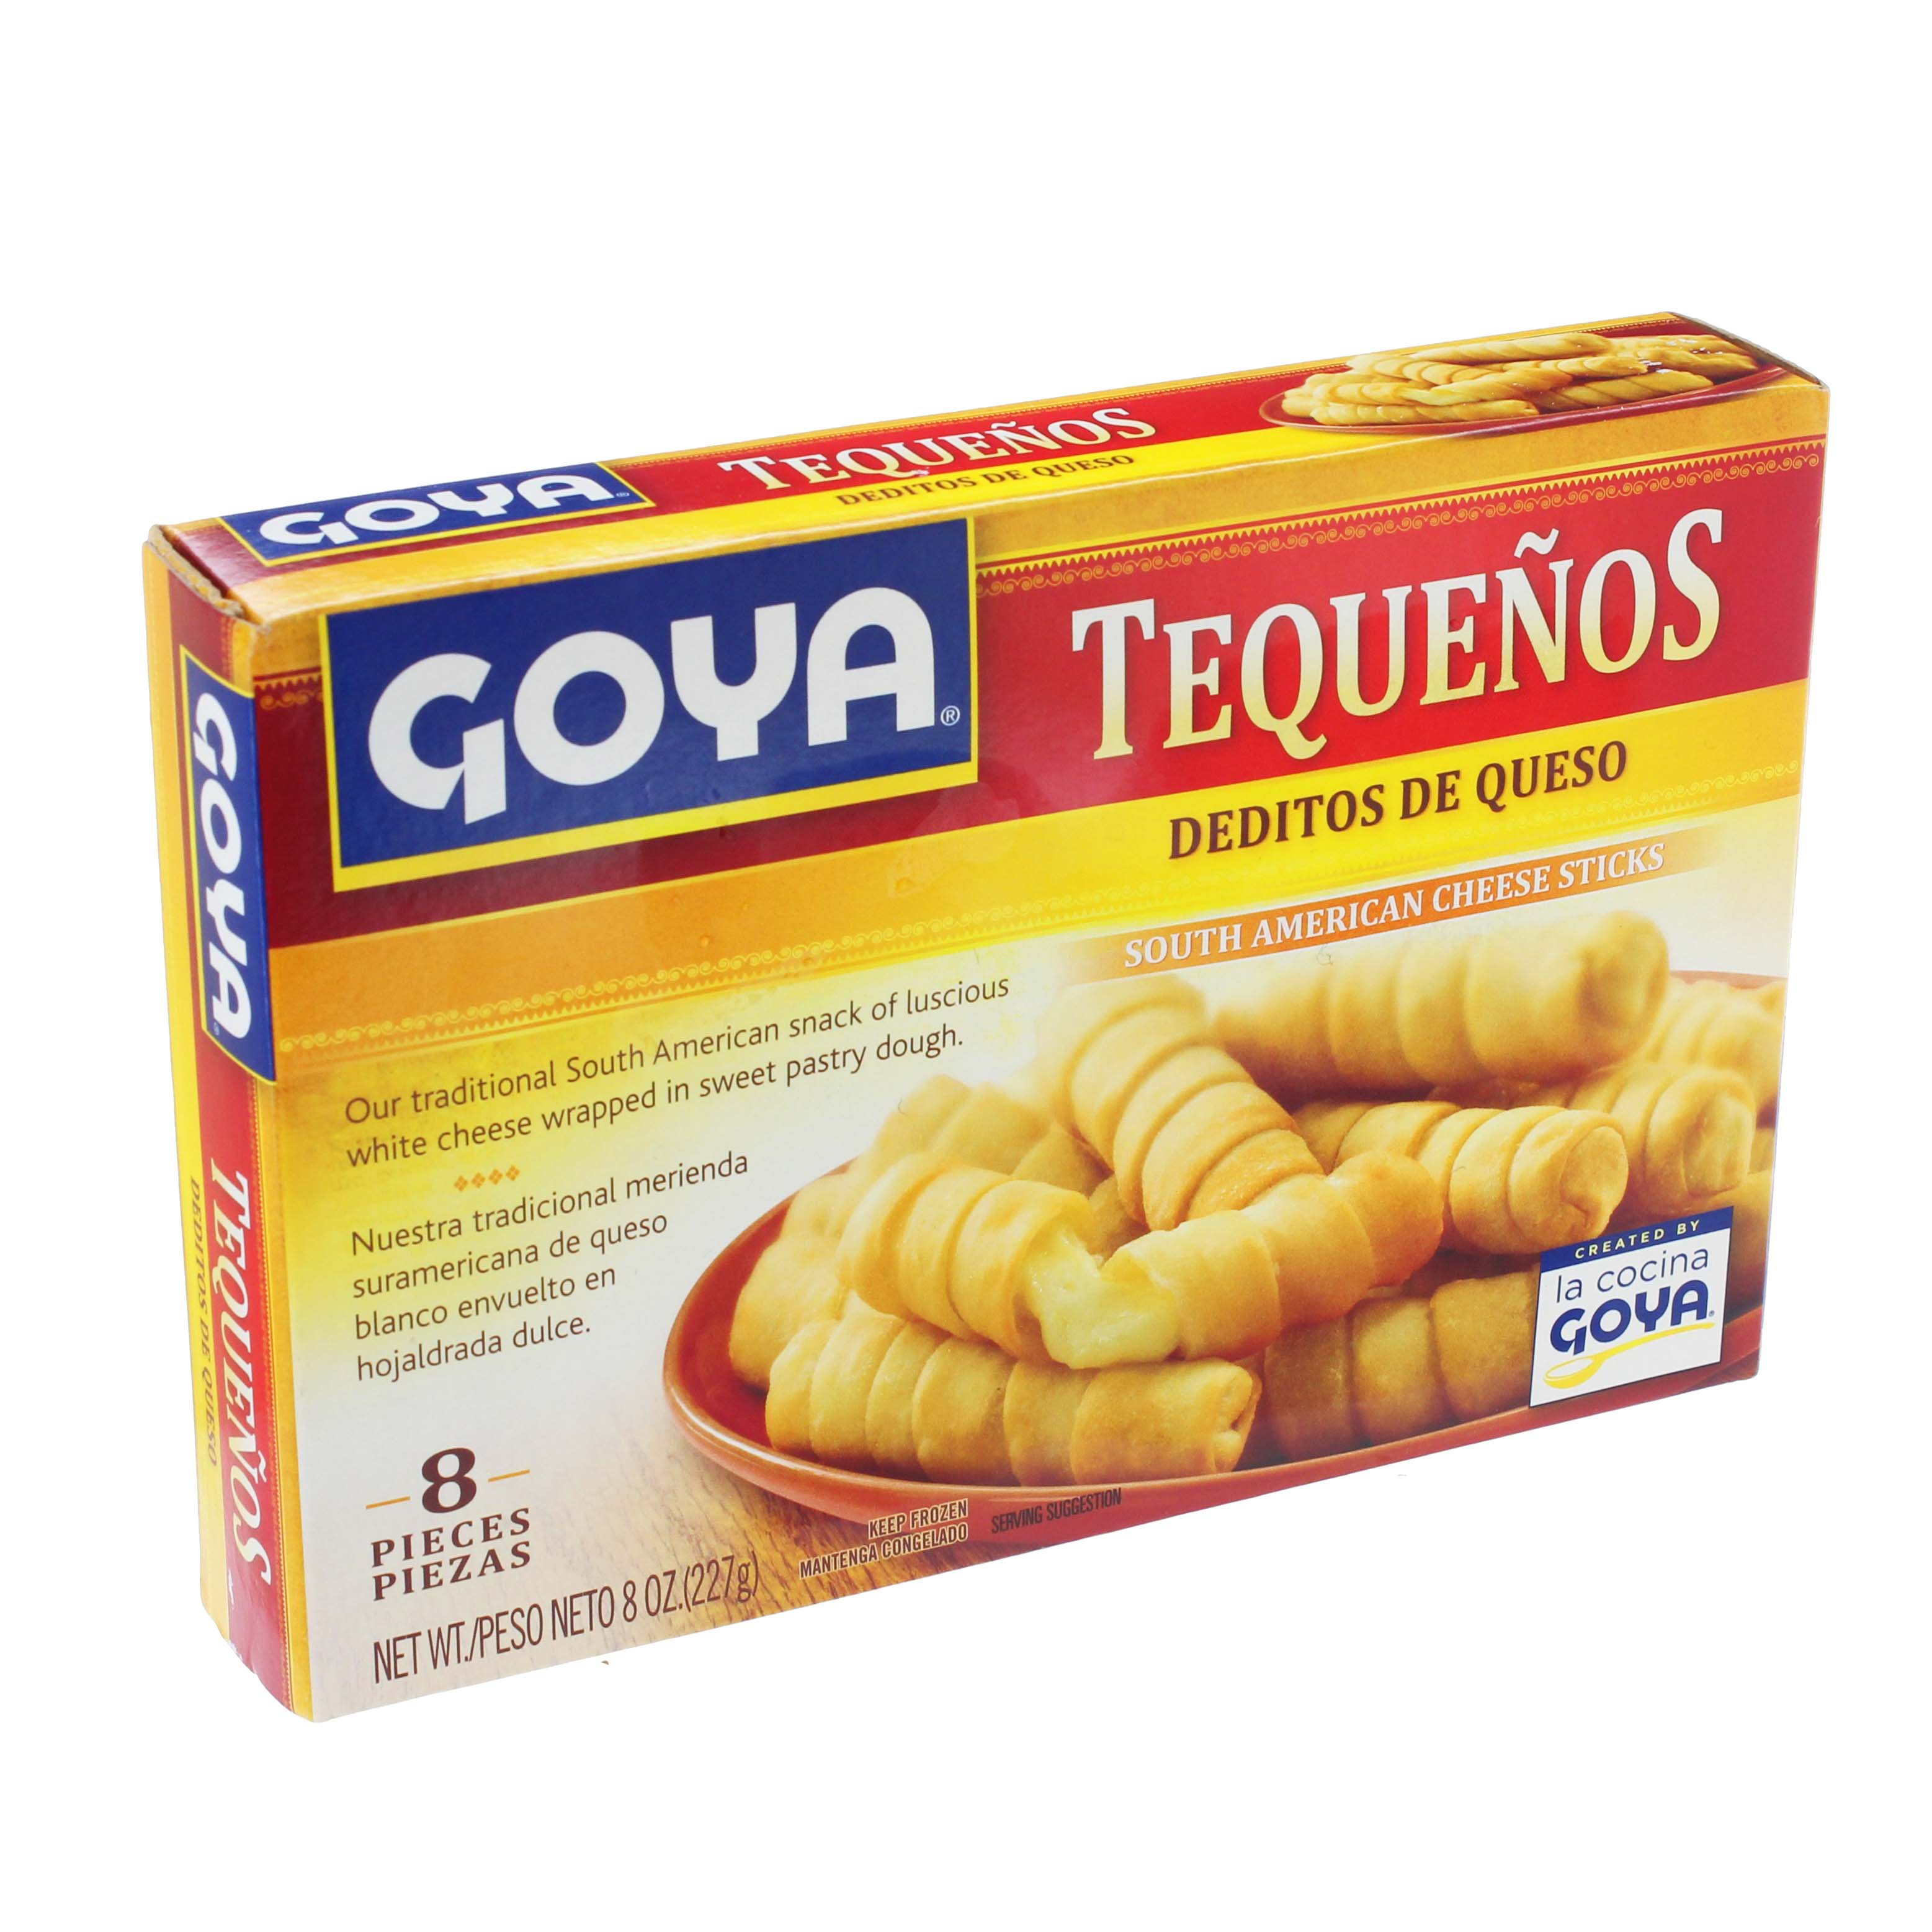 Goya Tequenos South American Cheese Sticks - Shop Appetizers at H-E-B